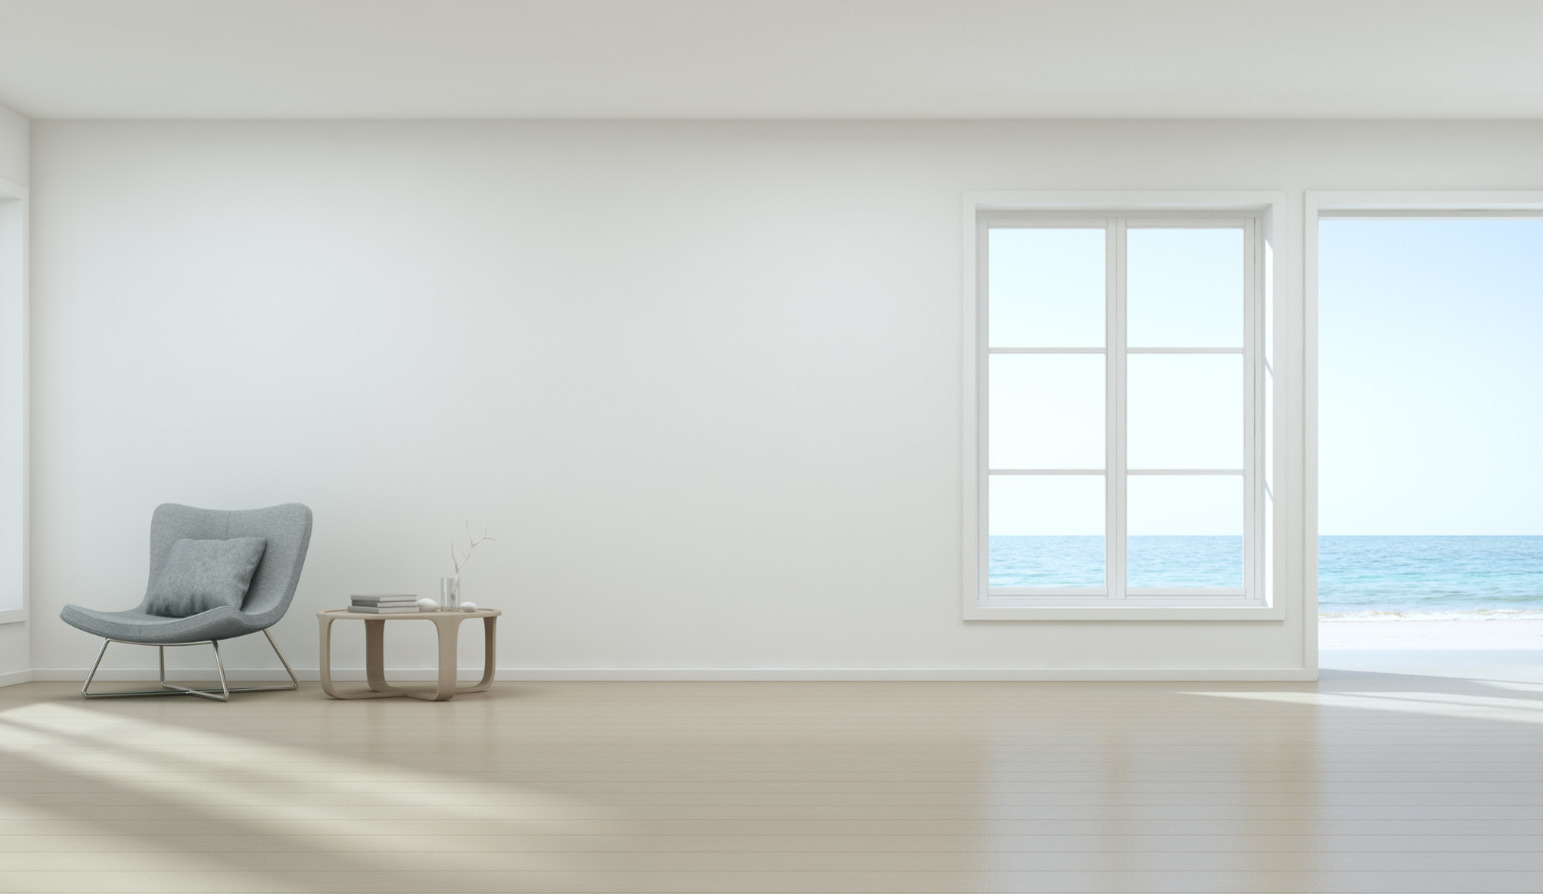 An open, white room with a window and big open doors, with a sole chair and small side table with some books on.